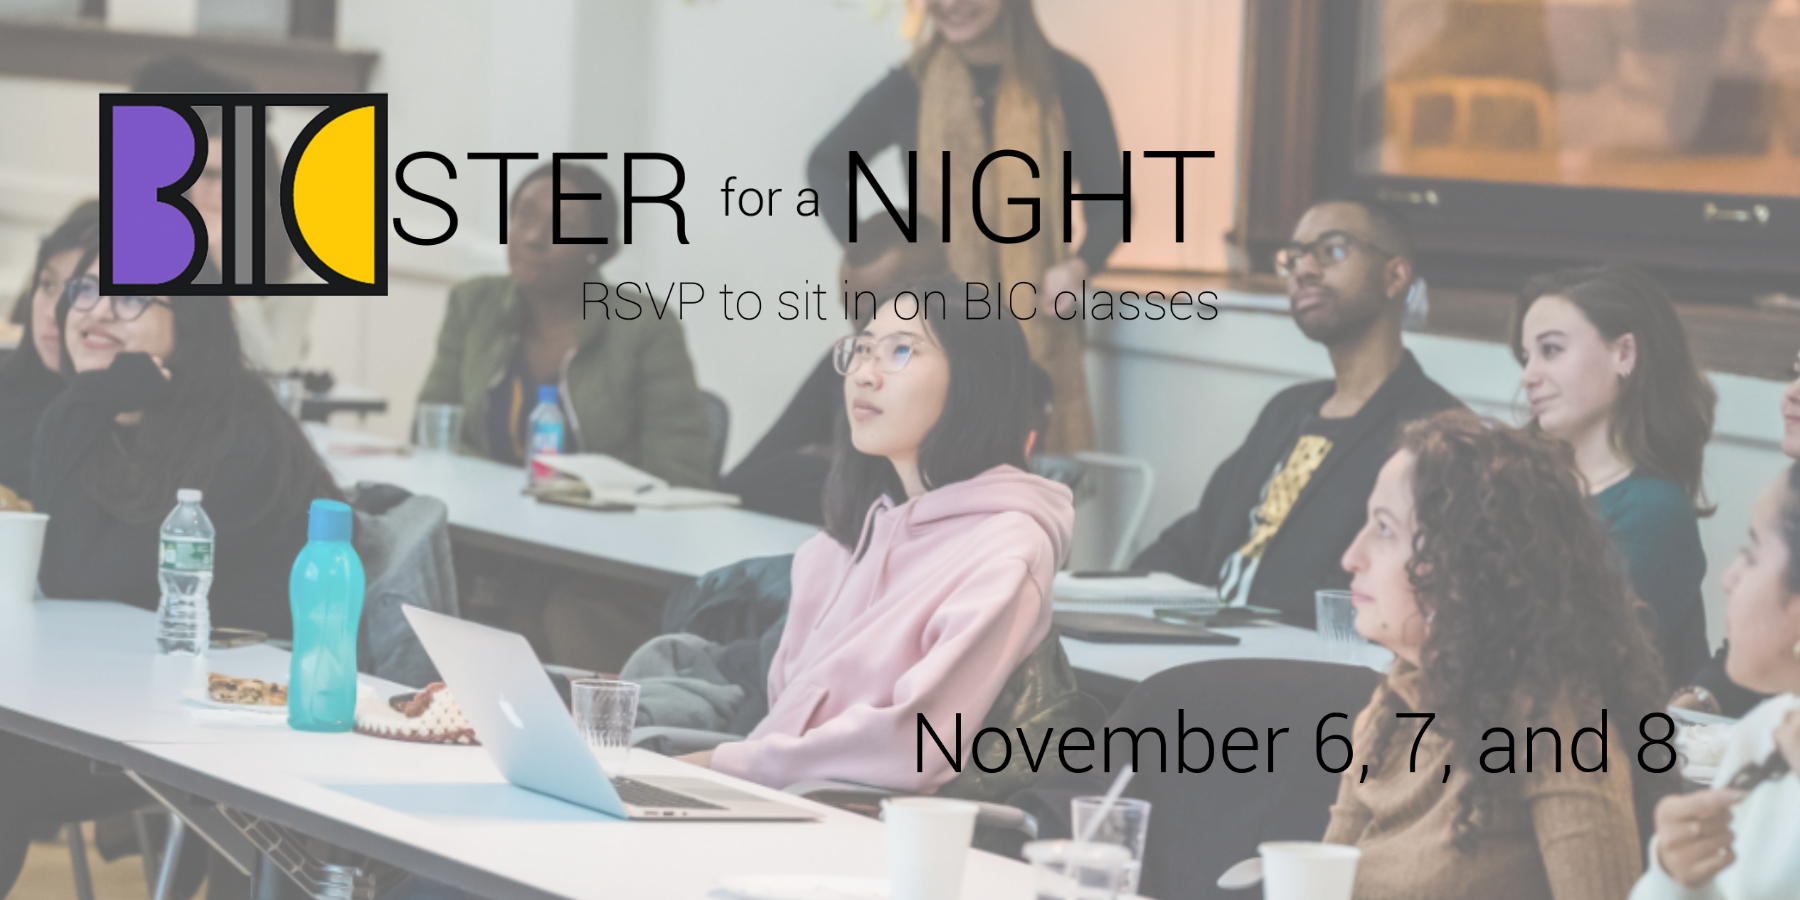 Students in a classroom along with the words BICster for a night. RSVP to sit in on BIC classes Nov 6, 7 and 8